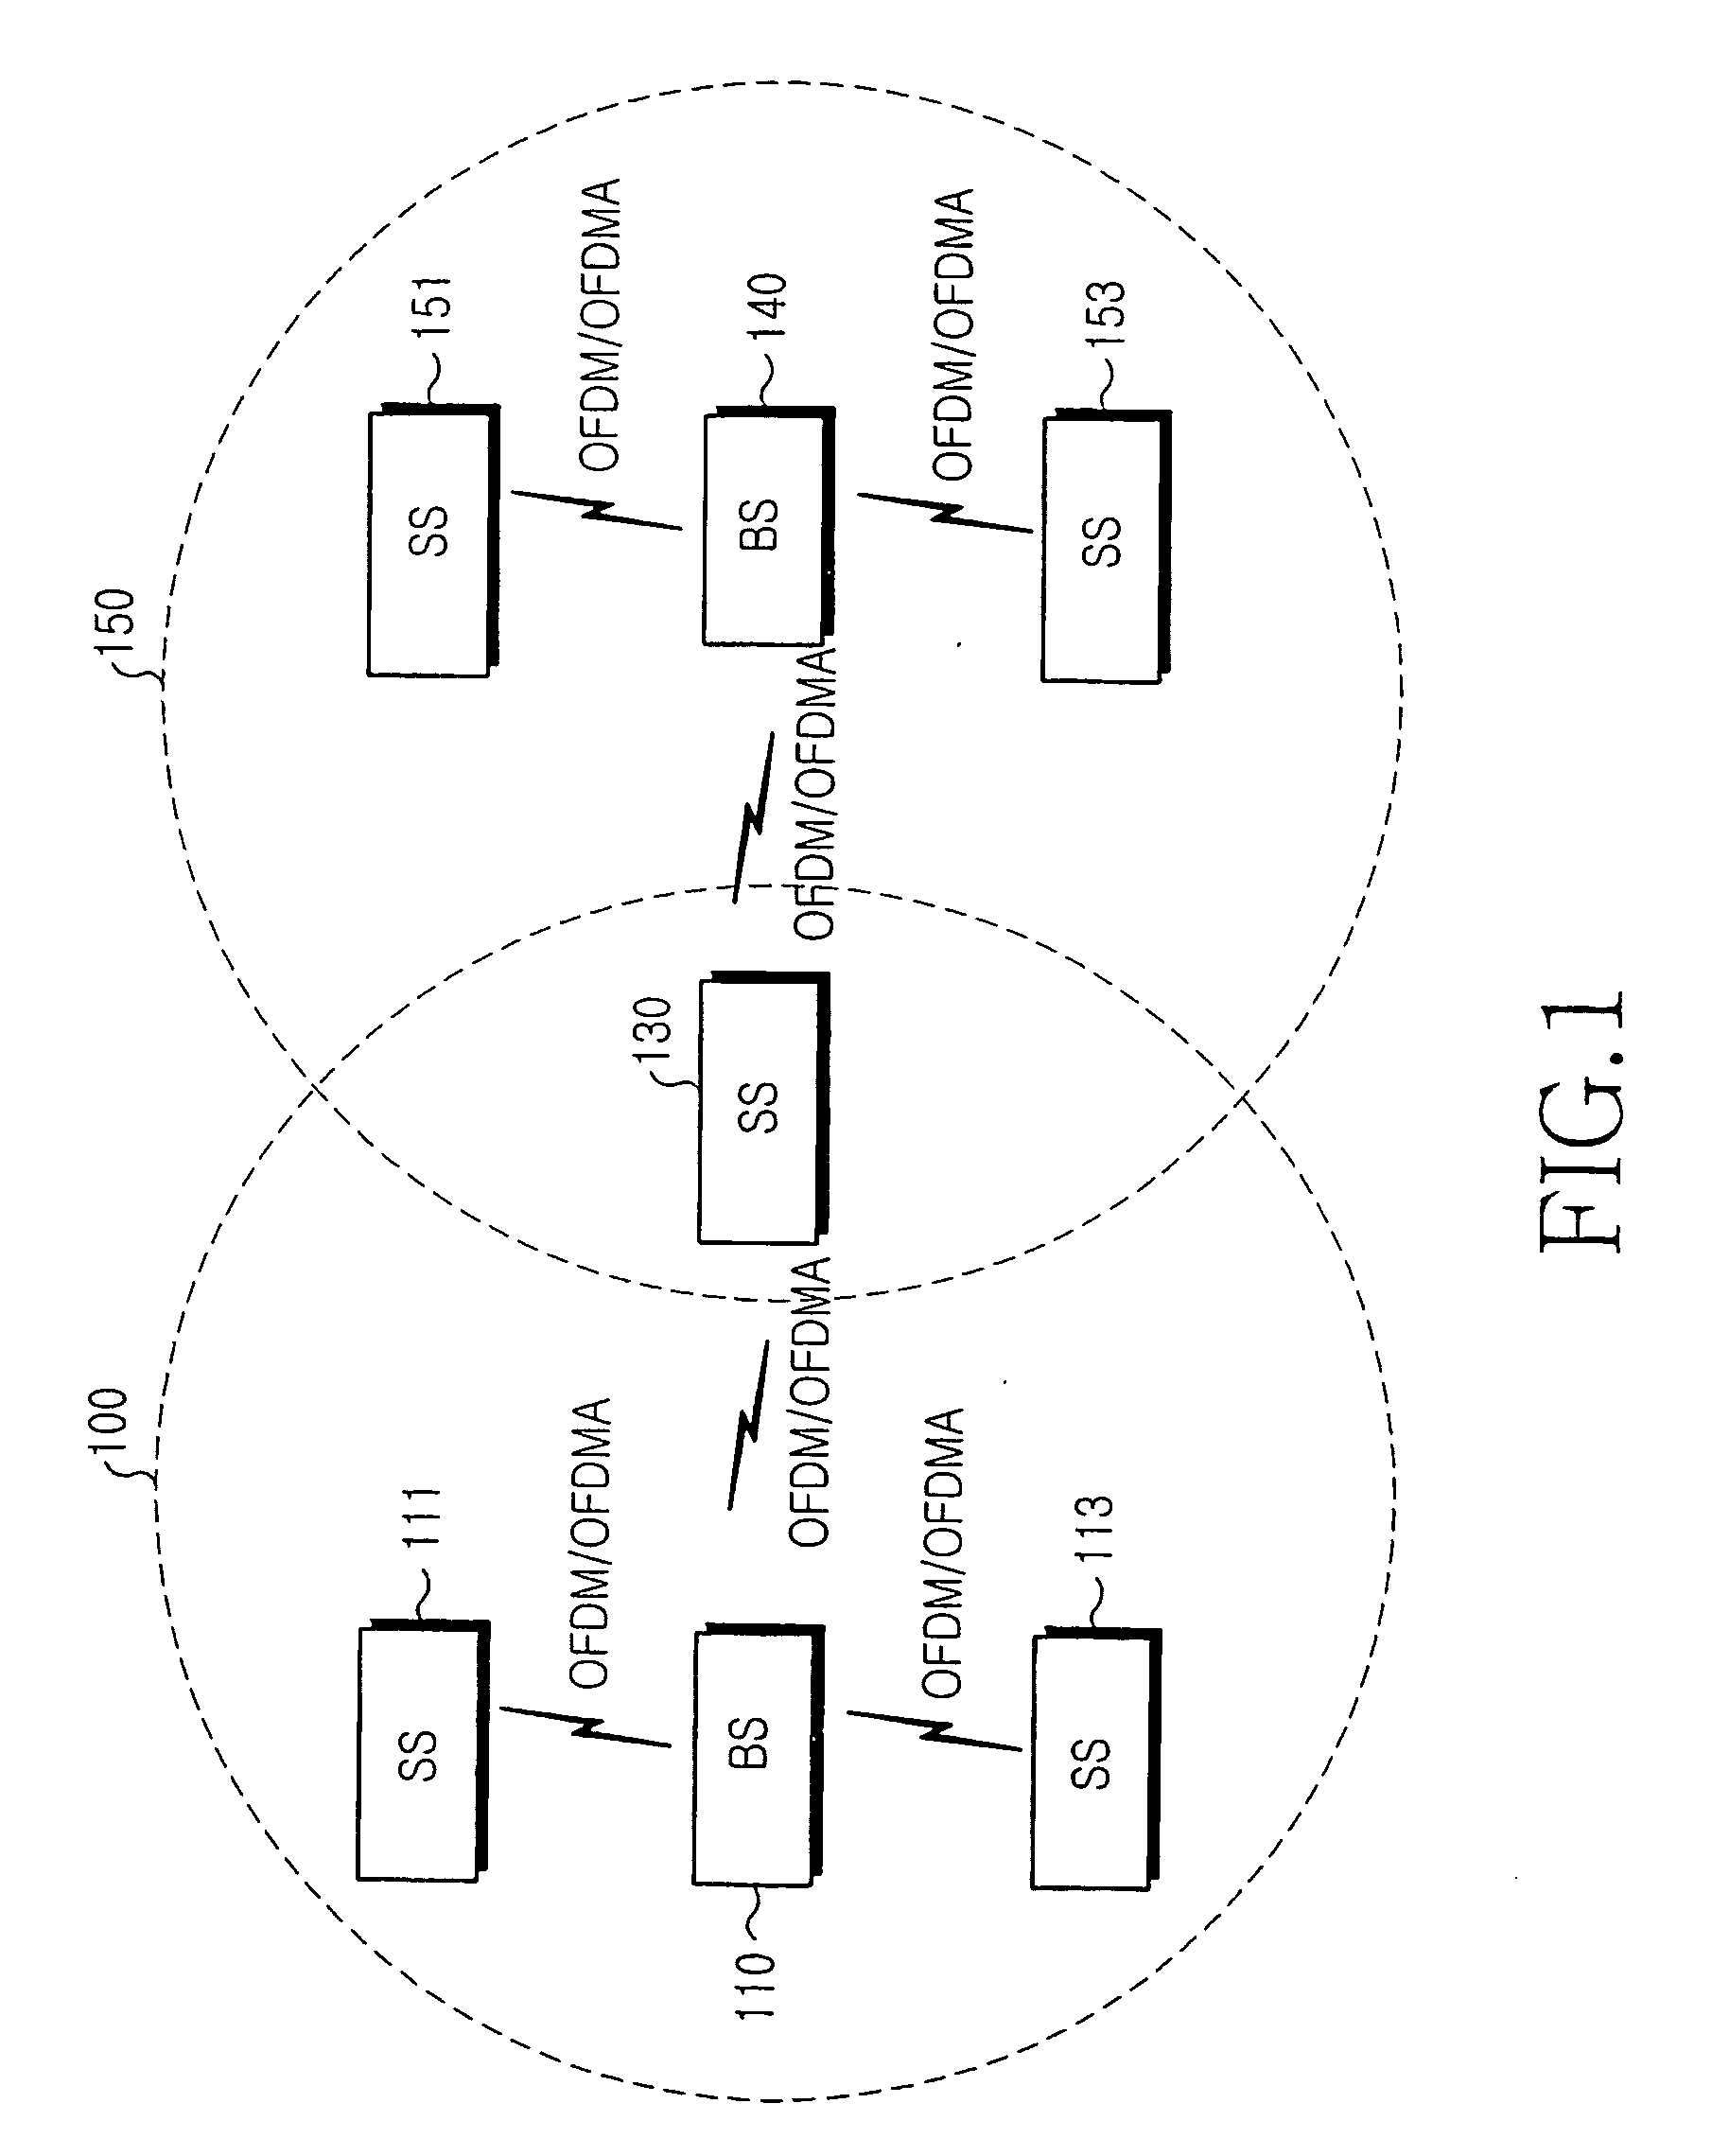 Method for providing multi-level access services in common access channel